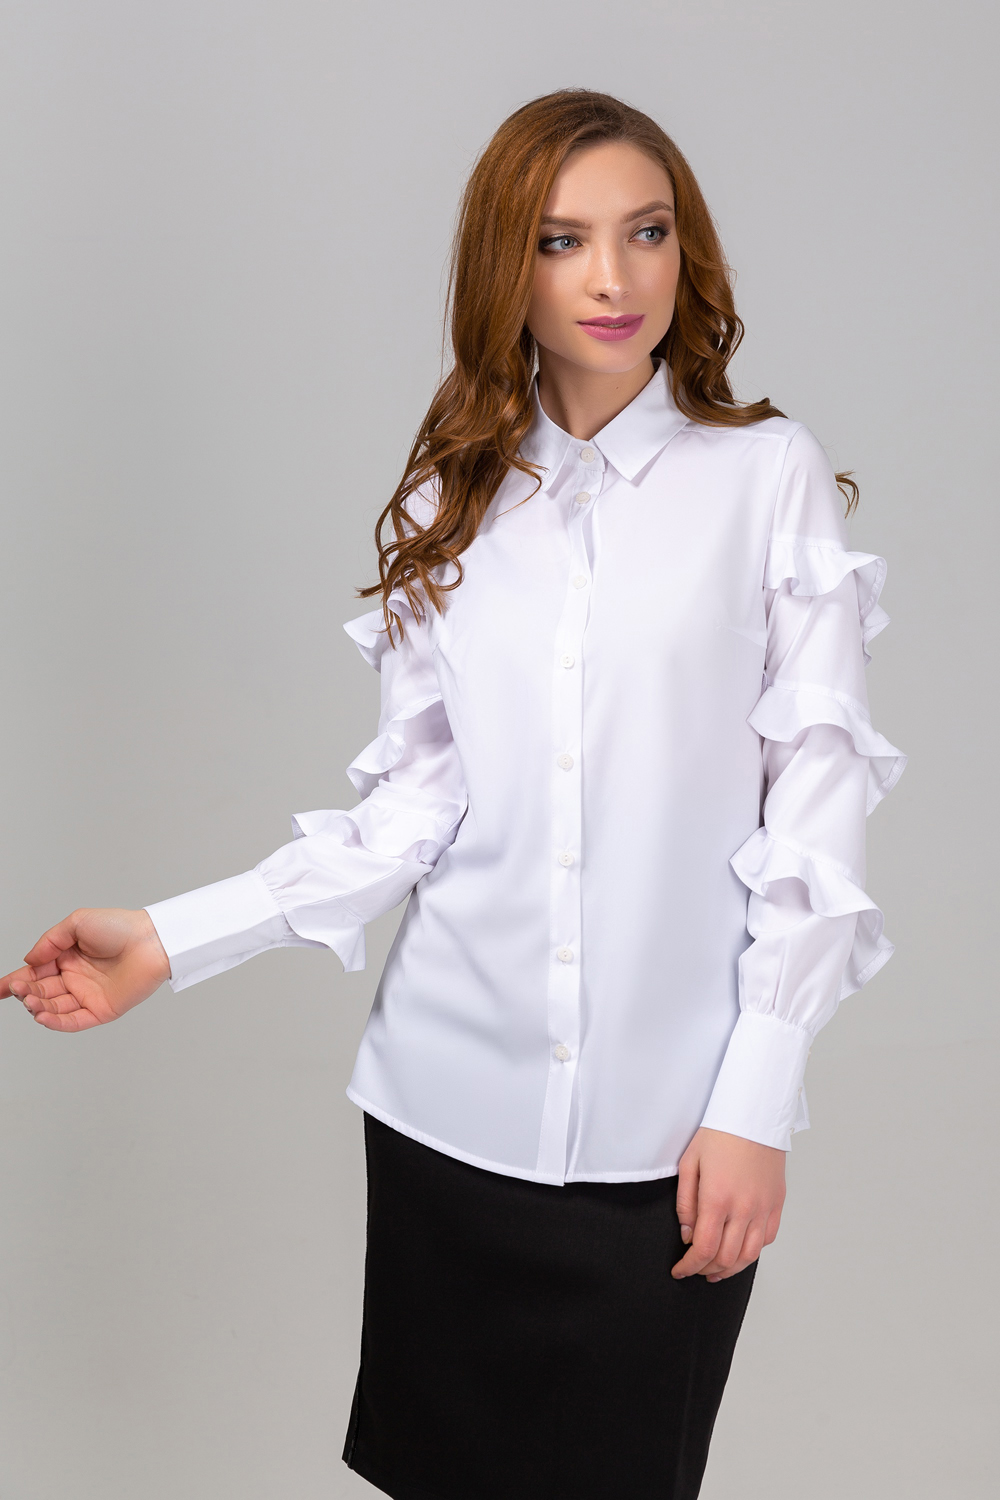 Fashion blouse with ruffles